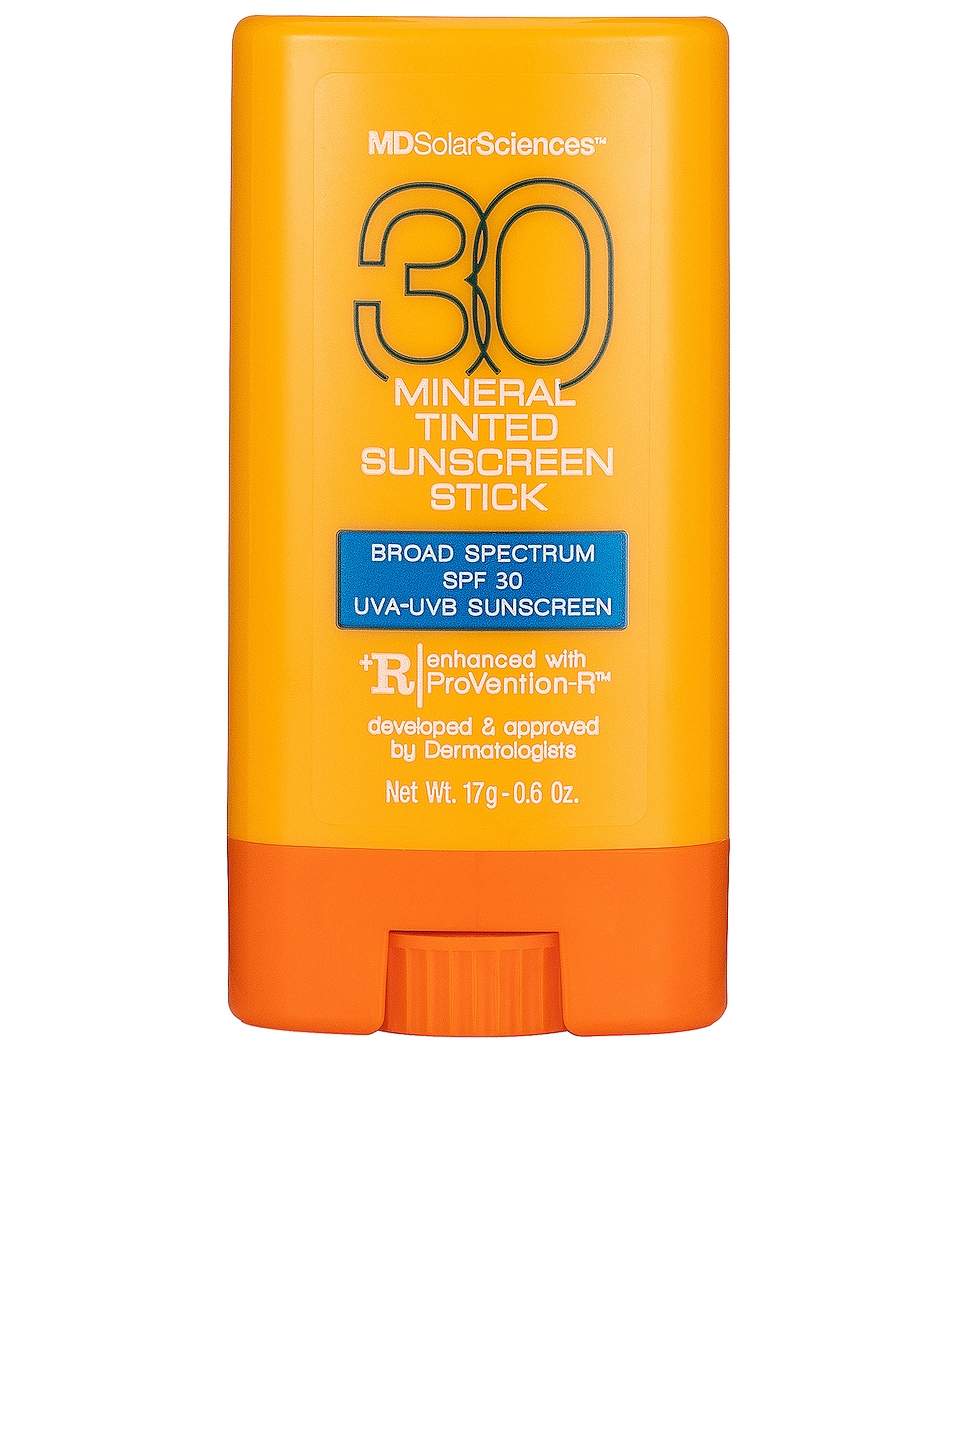 Mdsolarsciences Mineral Tinted Sunscreen Stick Spf 30 In N,a